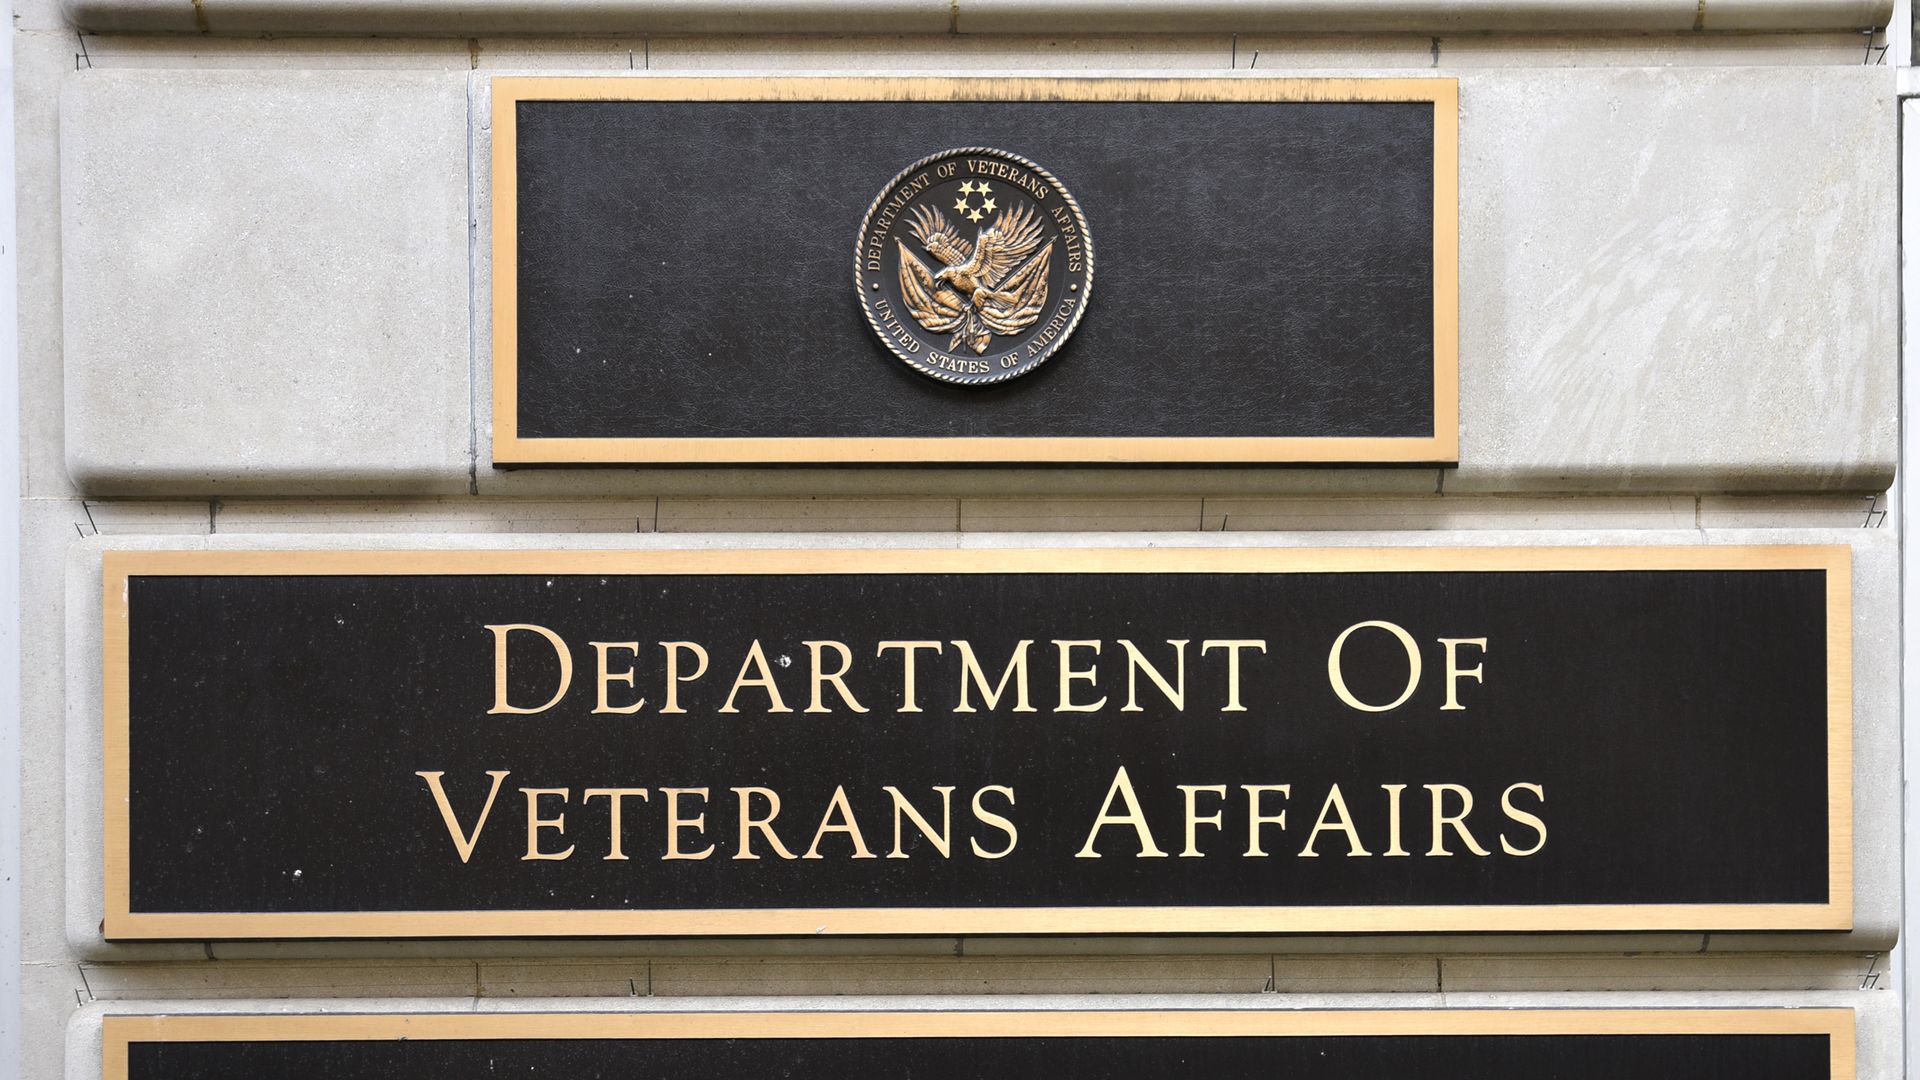 A metal plaque on the façade of the Department of Veterans Affairs building in Washington, D.C.